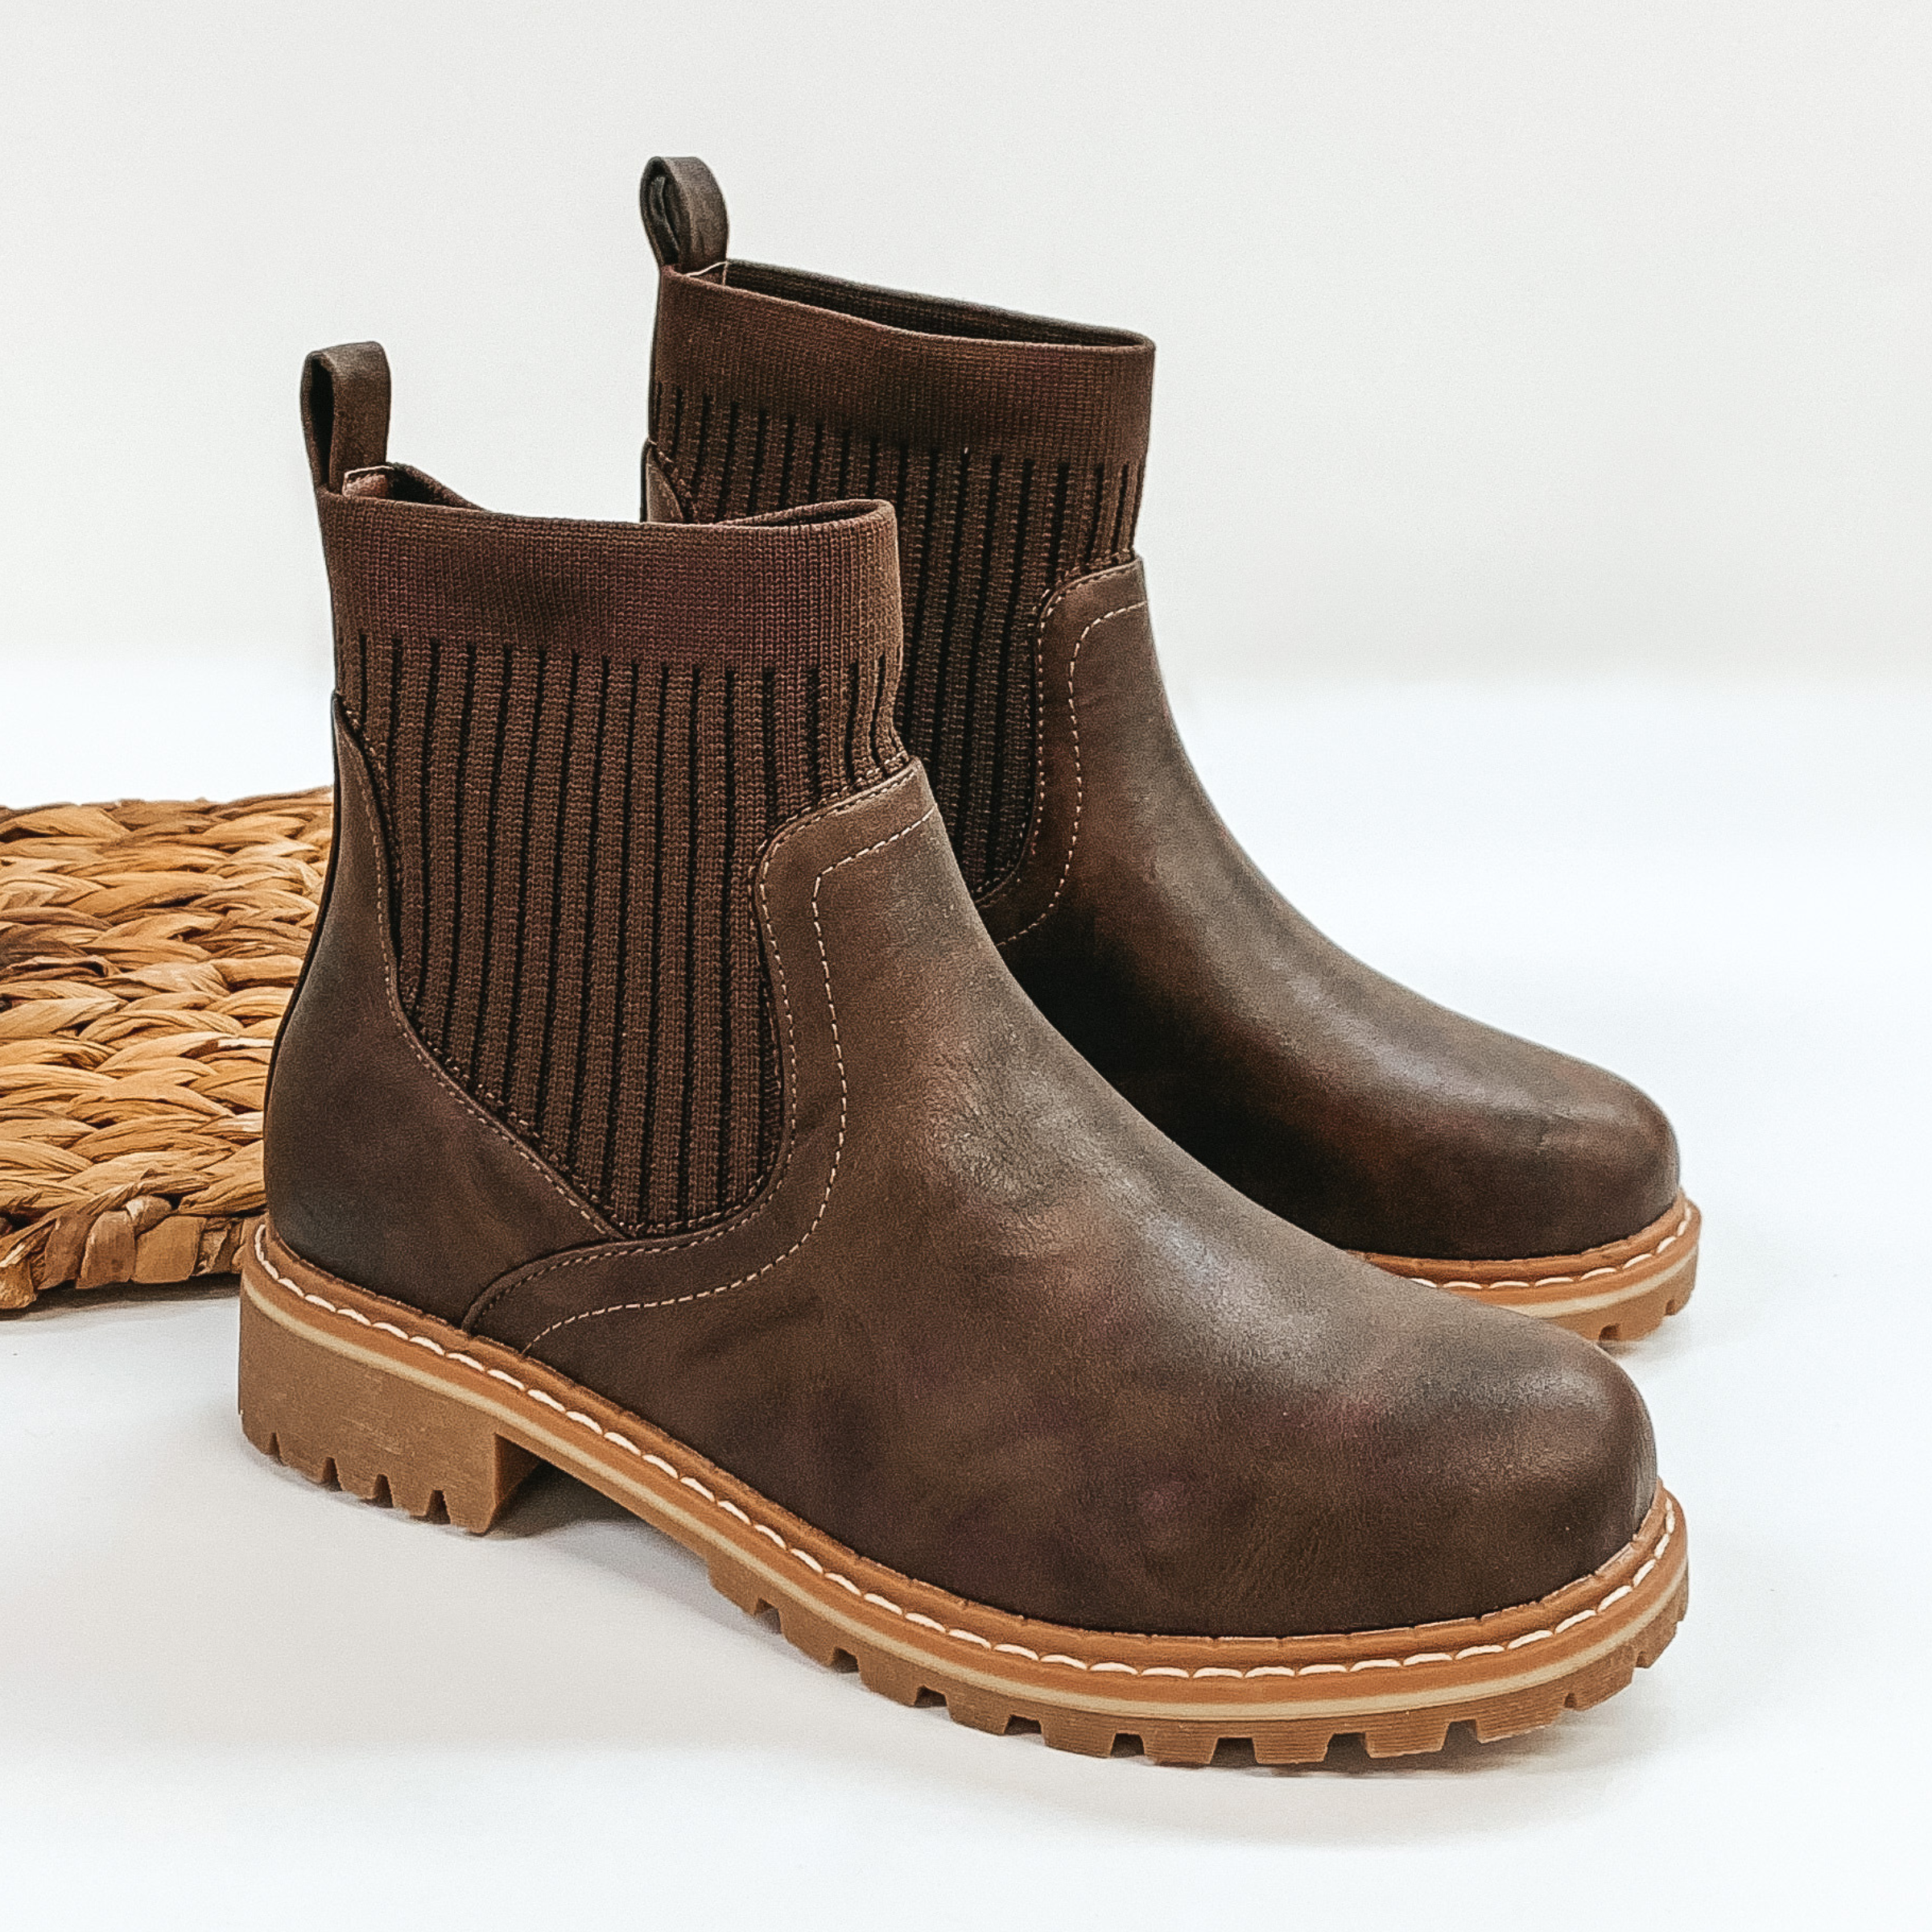 Slip on booties in brown with a tan, rubber sole. These boots are pictured on a white background. 